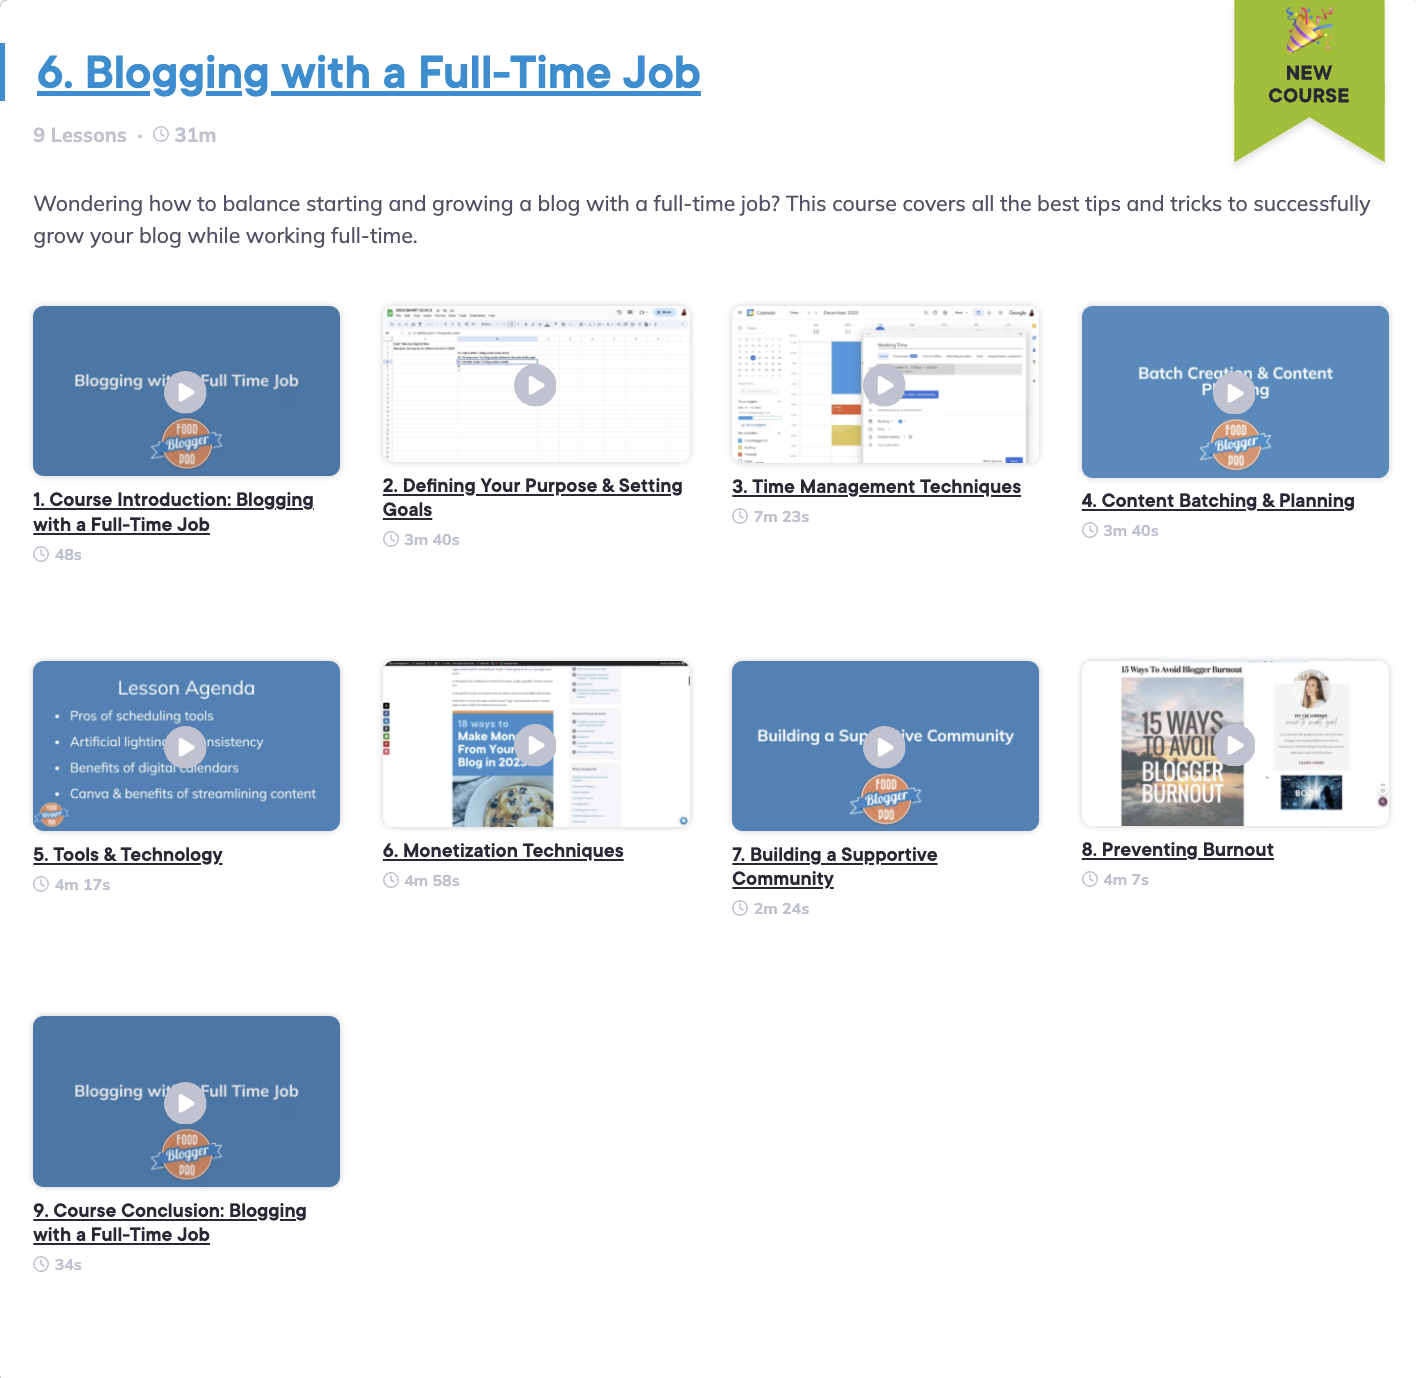 Overview of blogging with a full-time job course that shows the individual lessons.